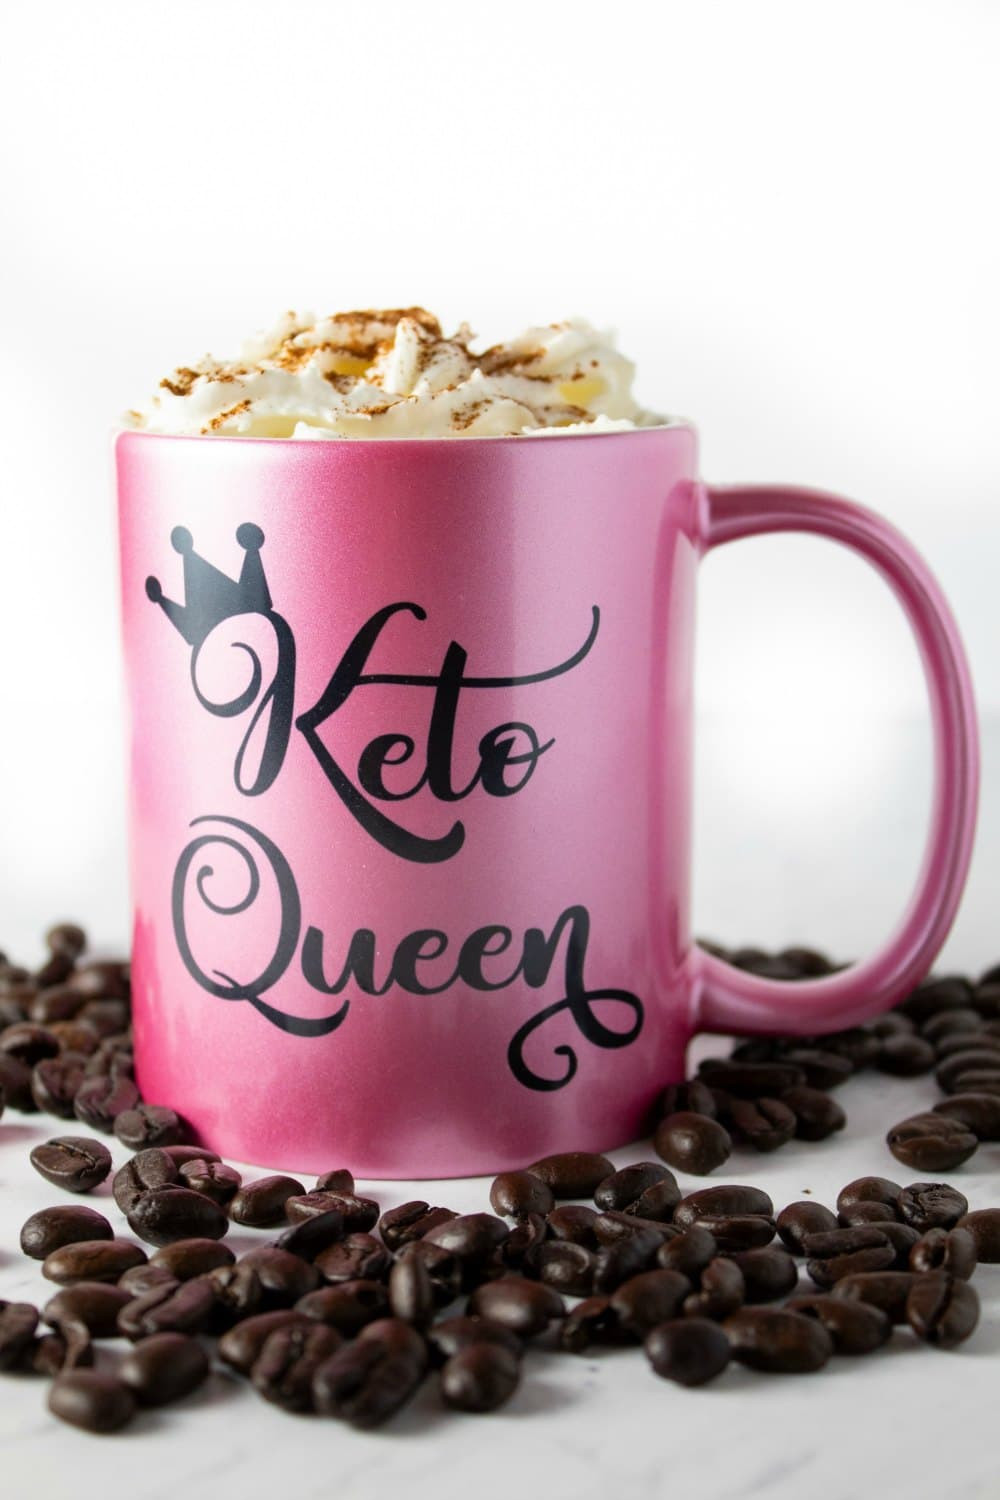 Keto Diet Coffee
 17 of the Best Keto Coffee Drinks to Help You Rock the